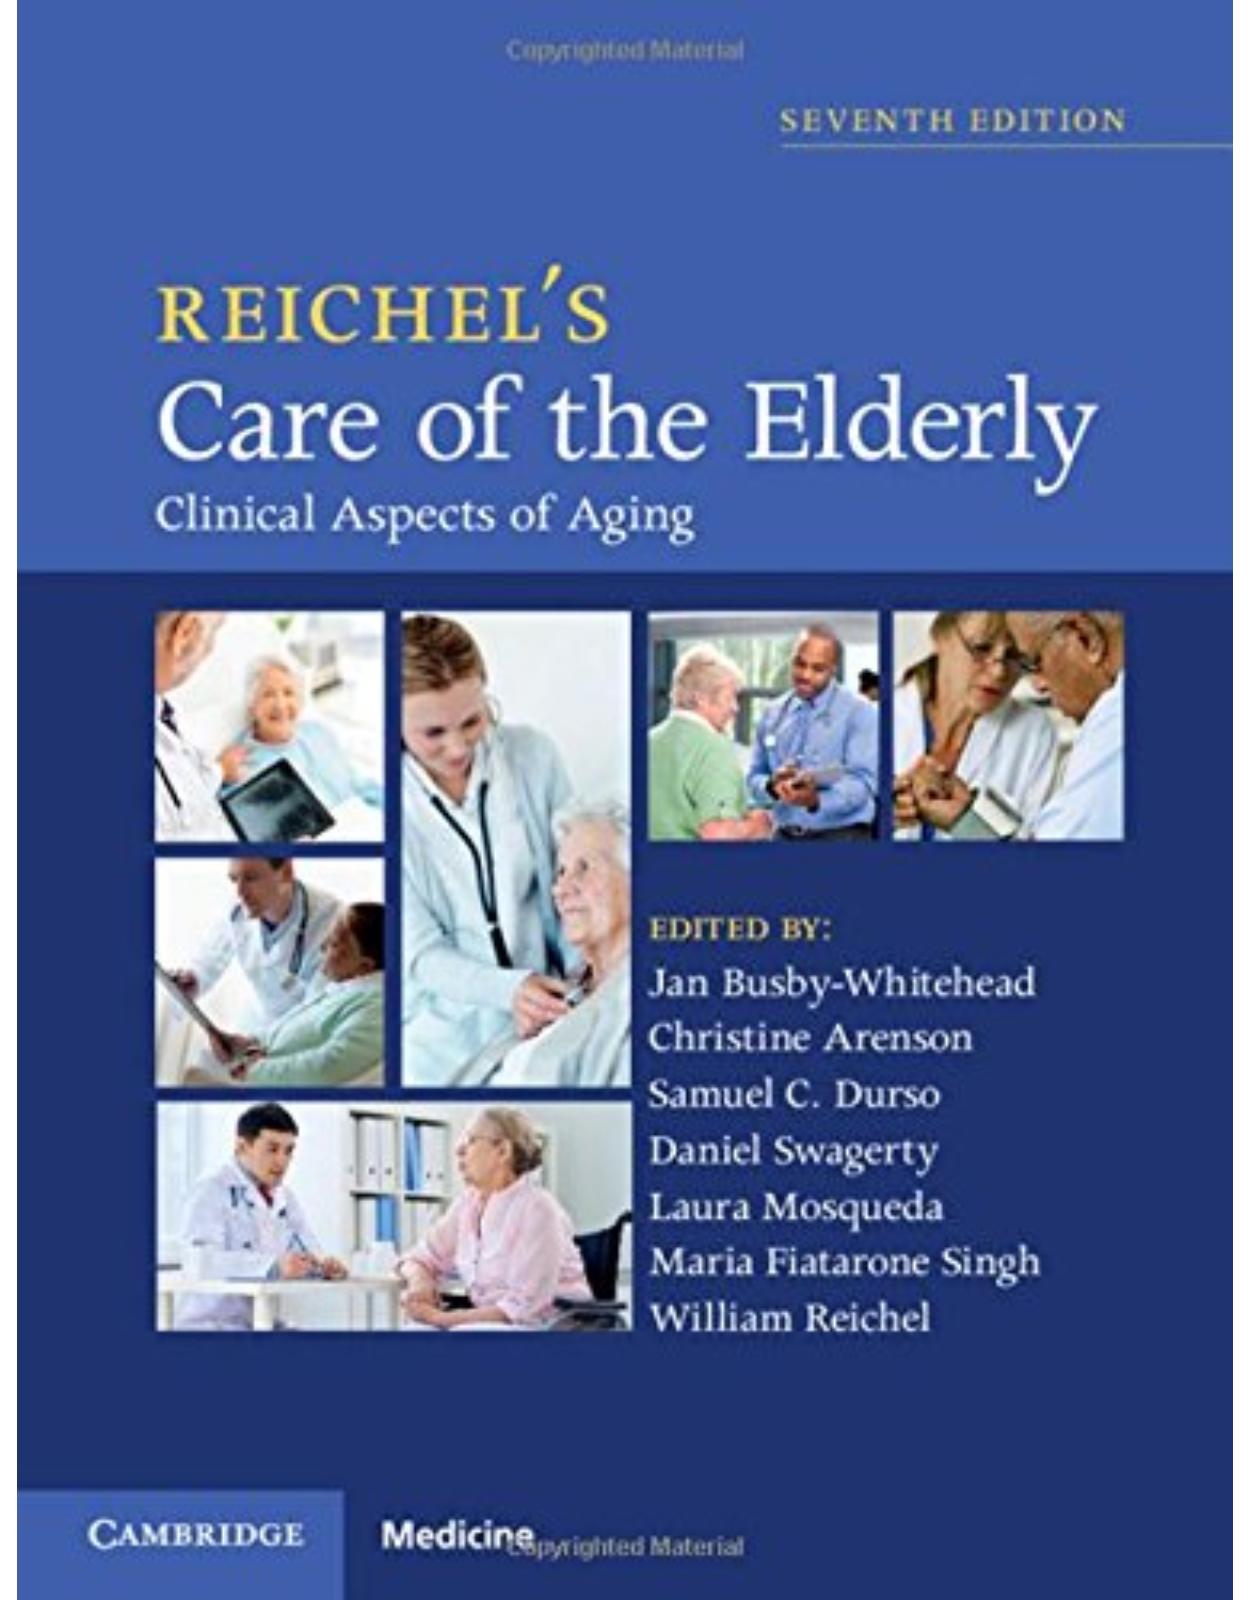 Reichel's Care of the Elderly. Clinical Aspects of Aging, 7th Edition